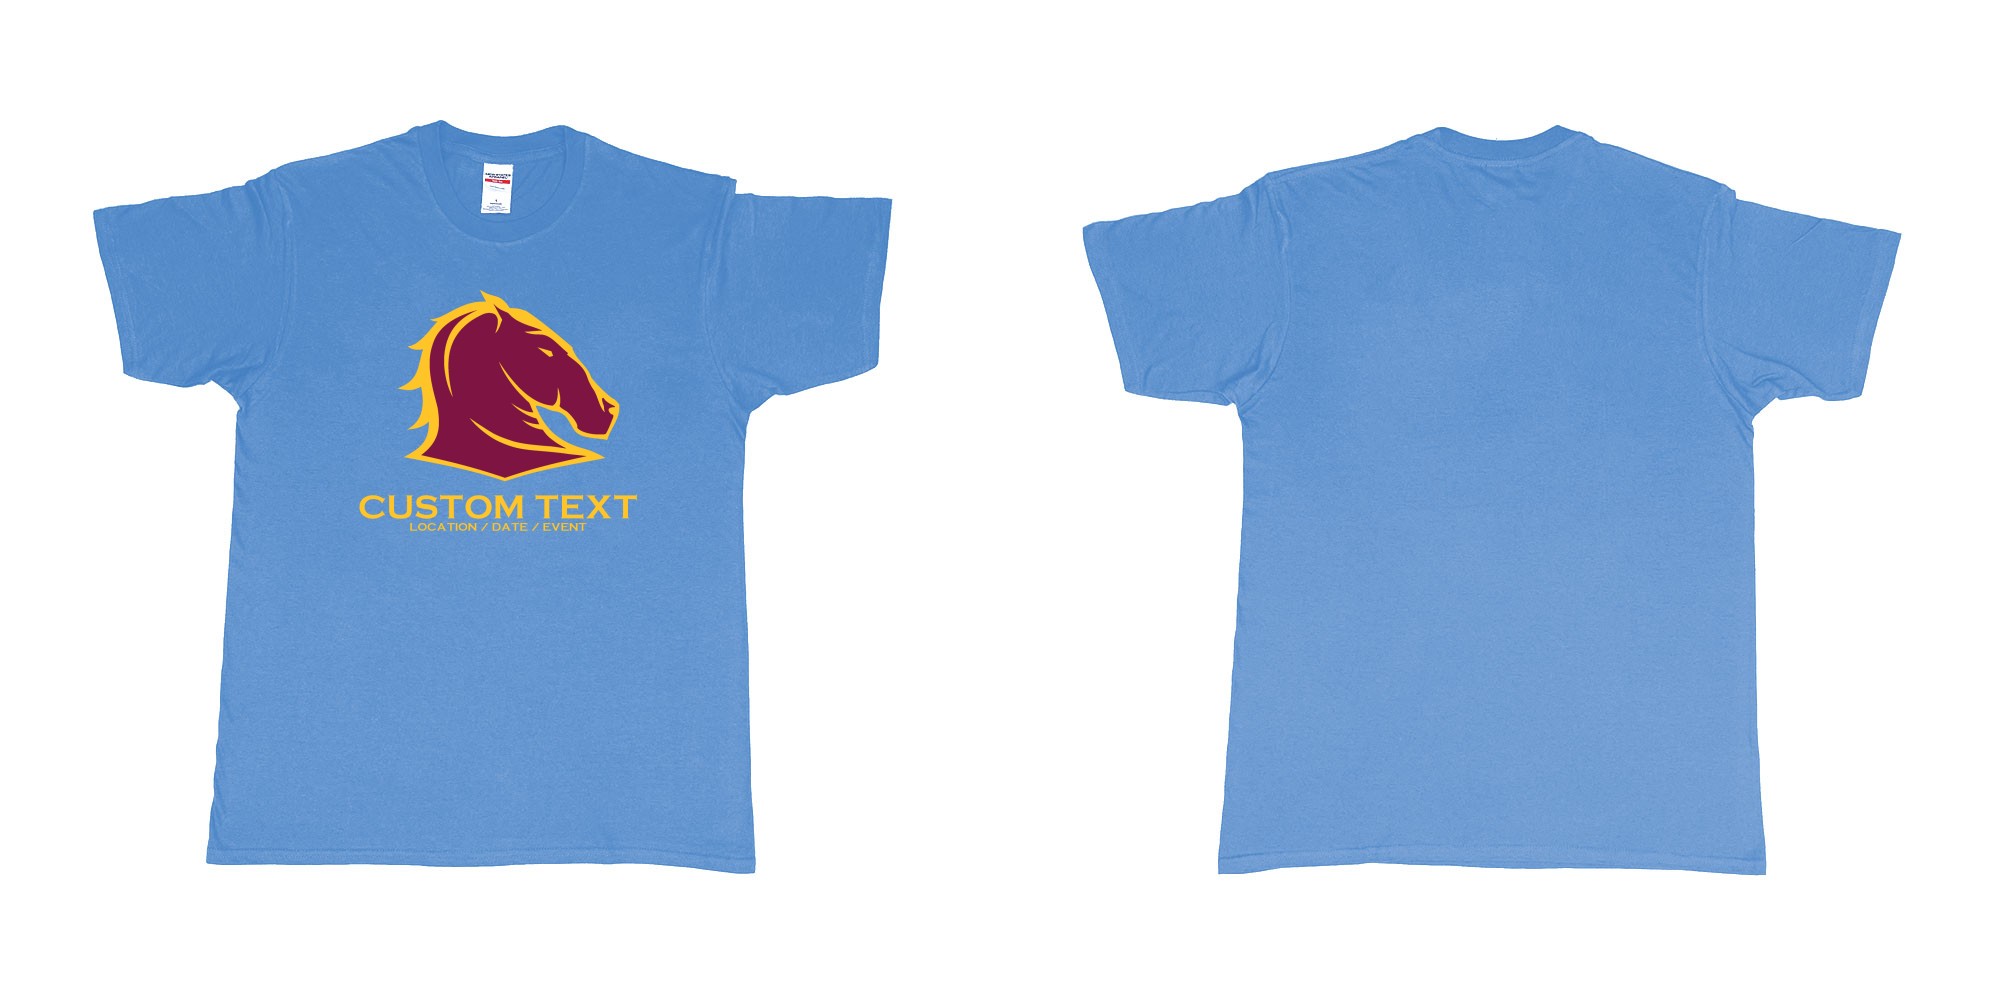 Custom tshirt design brisbane broncos australian professional rugby league football club queensland in fabric color carolina-blue choice your own text made in Bali by The Pirate Way